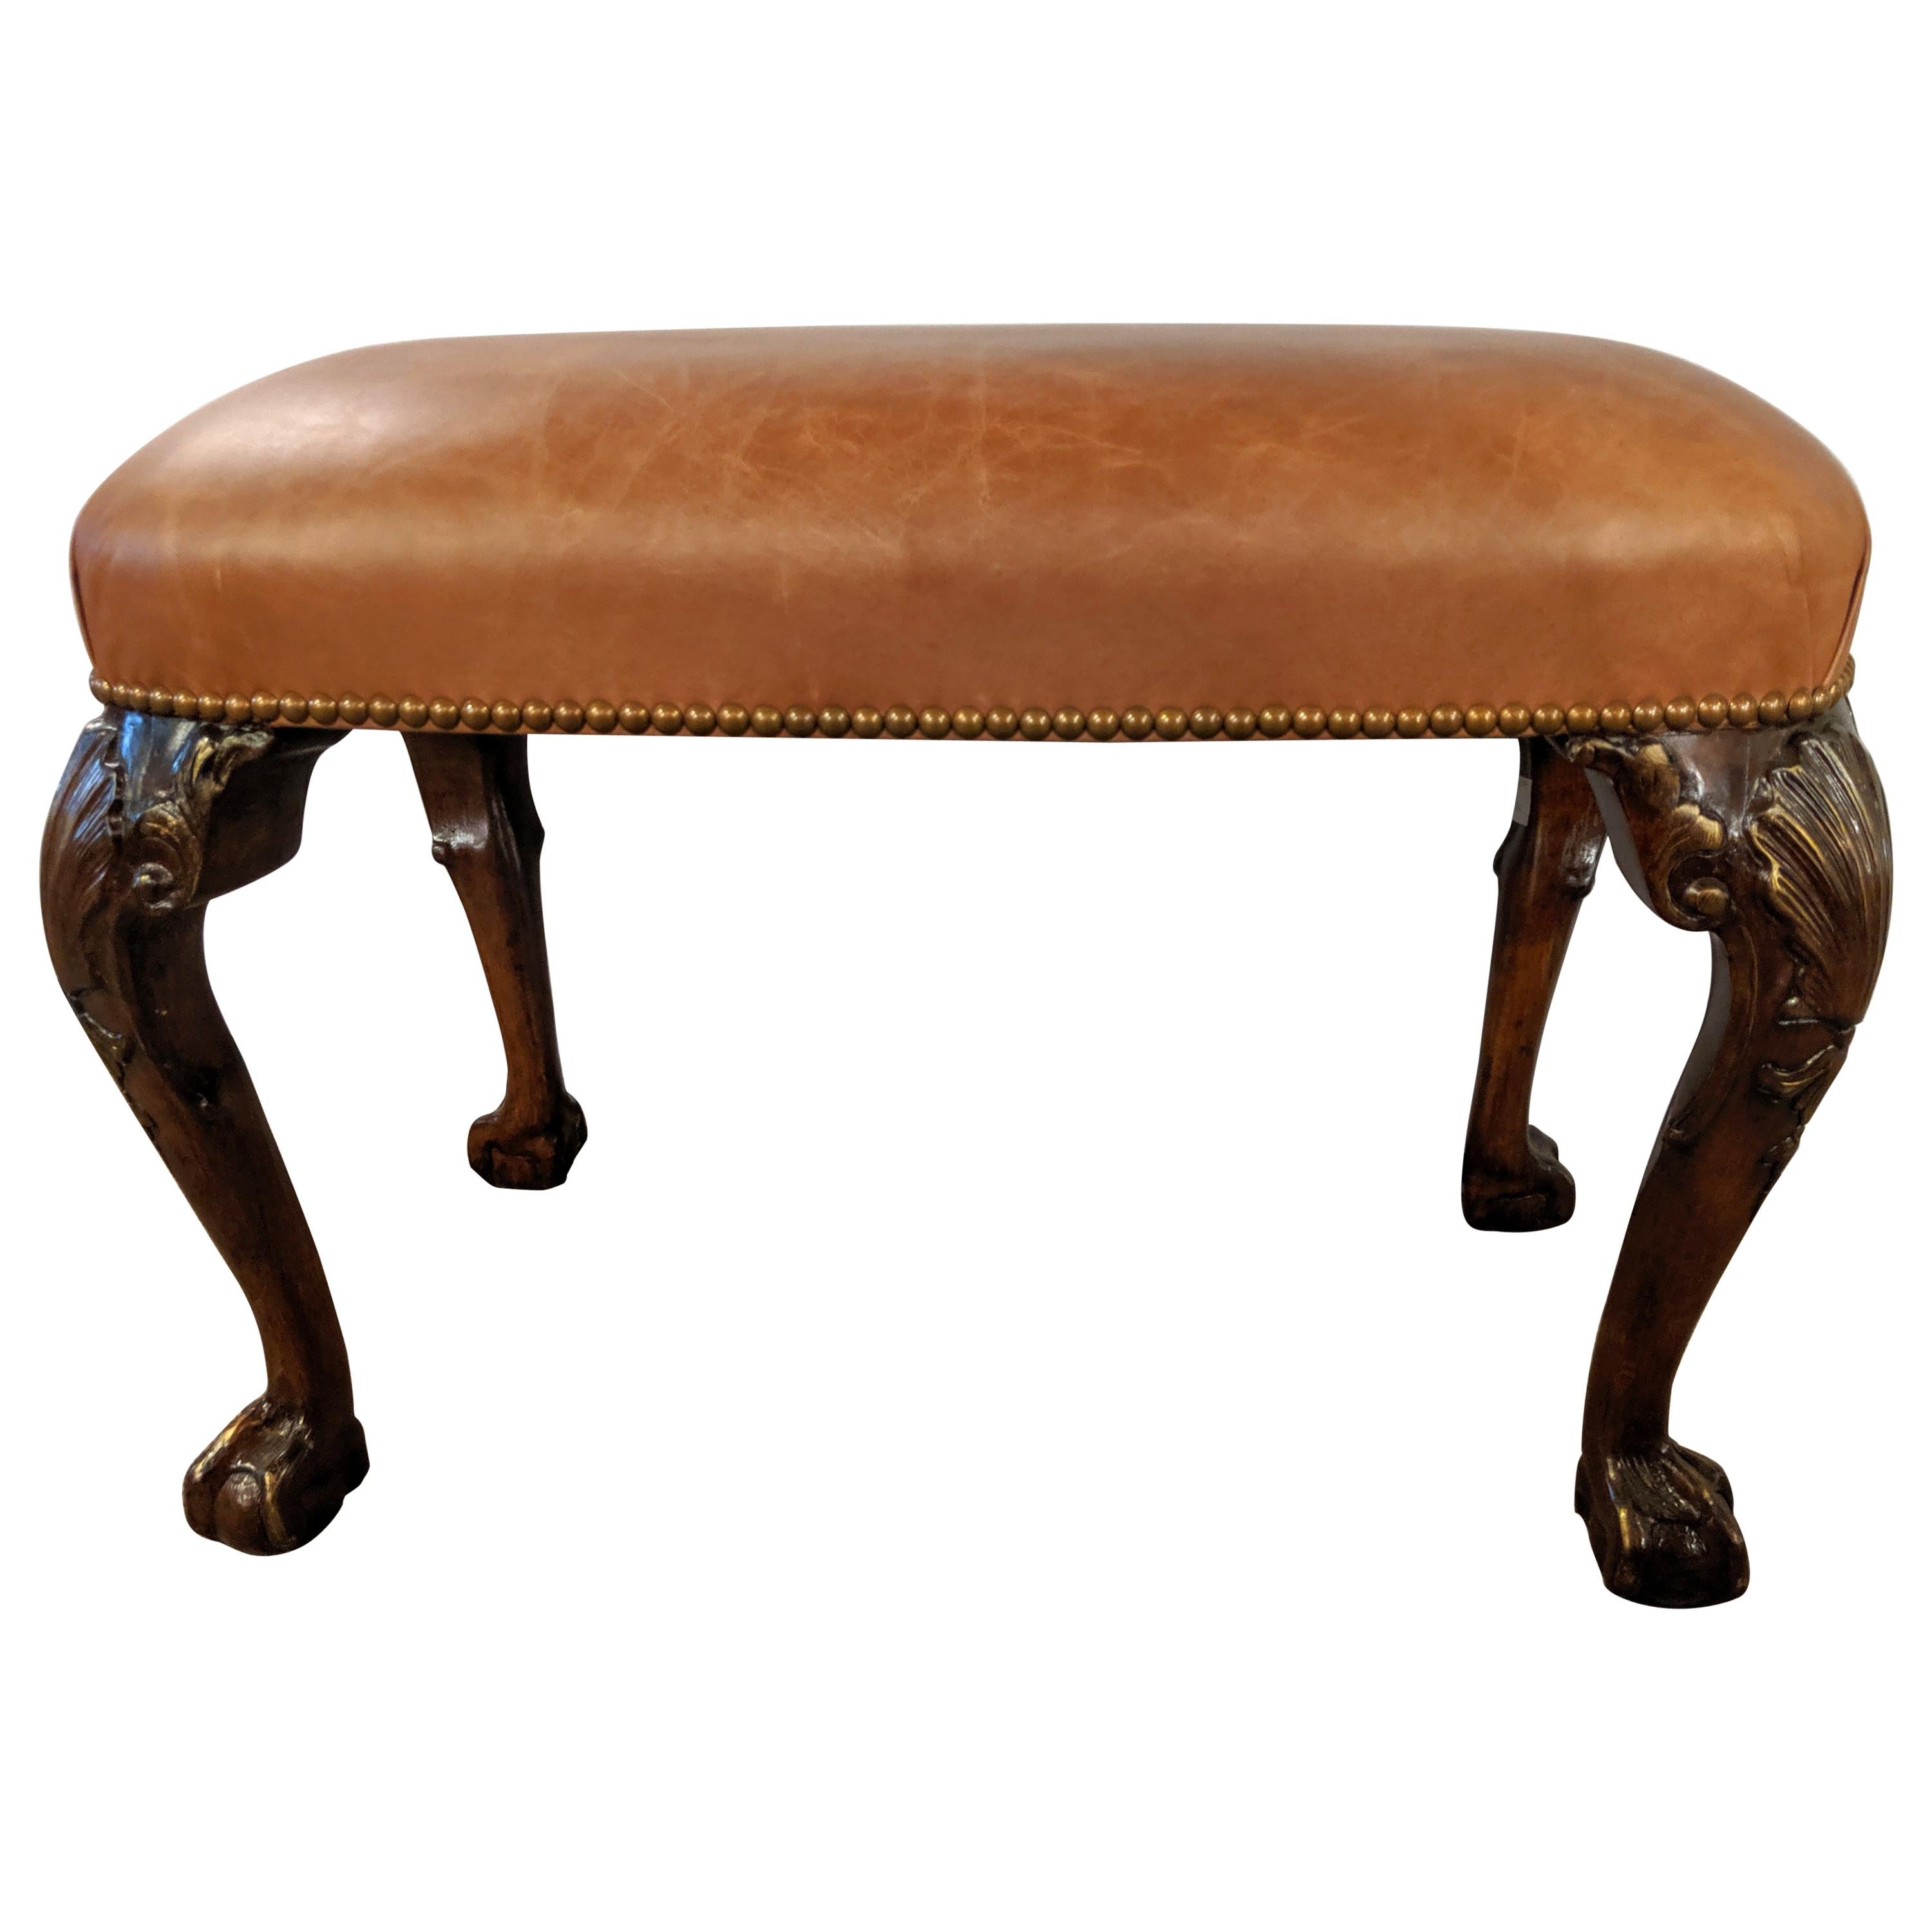 Georgian Leather Ball and Claw Foot Stool or Bench